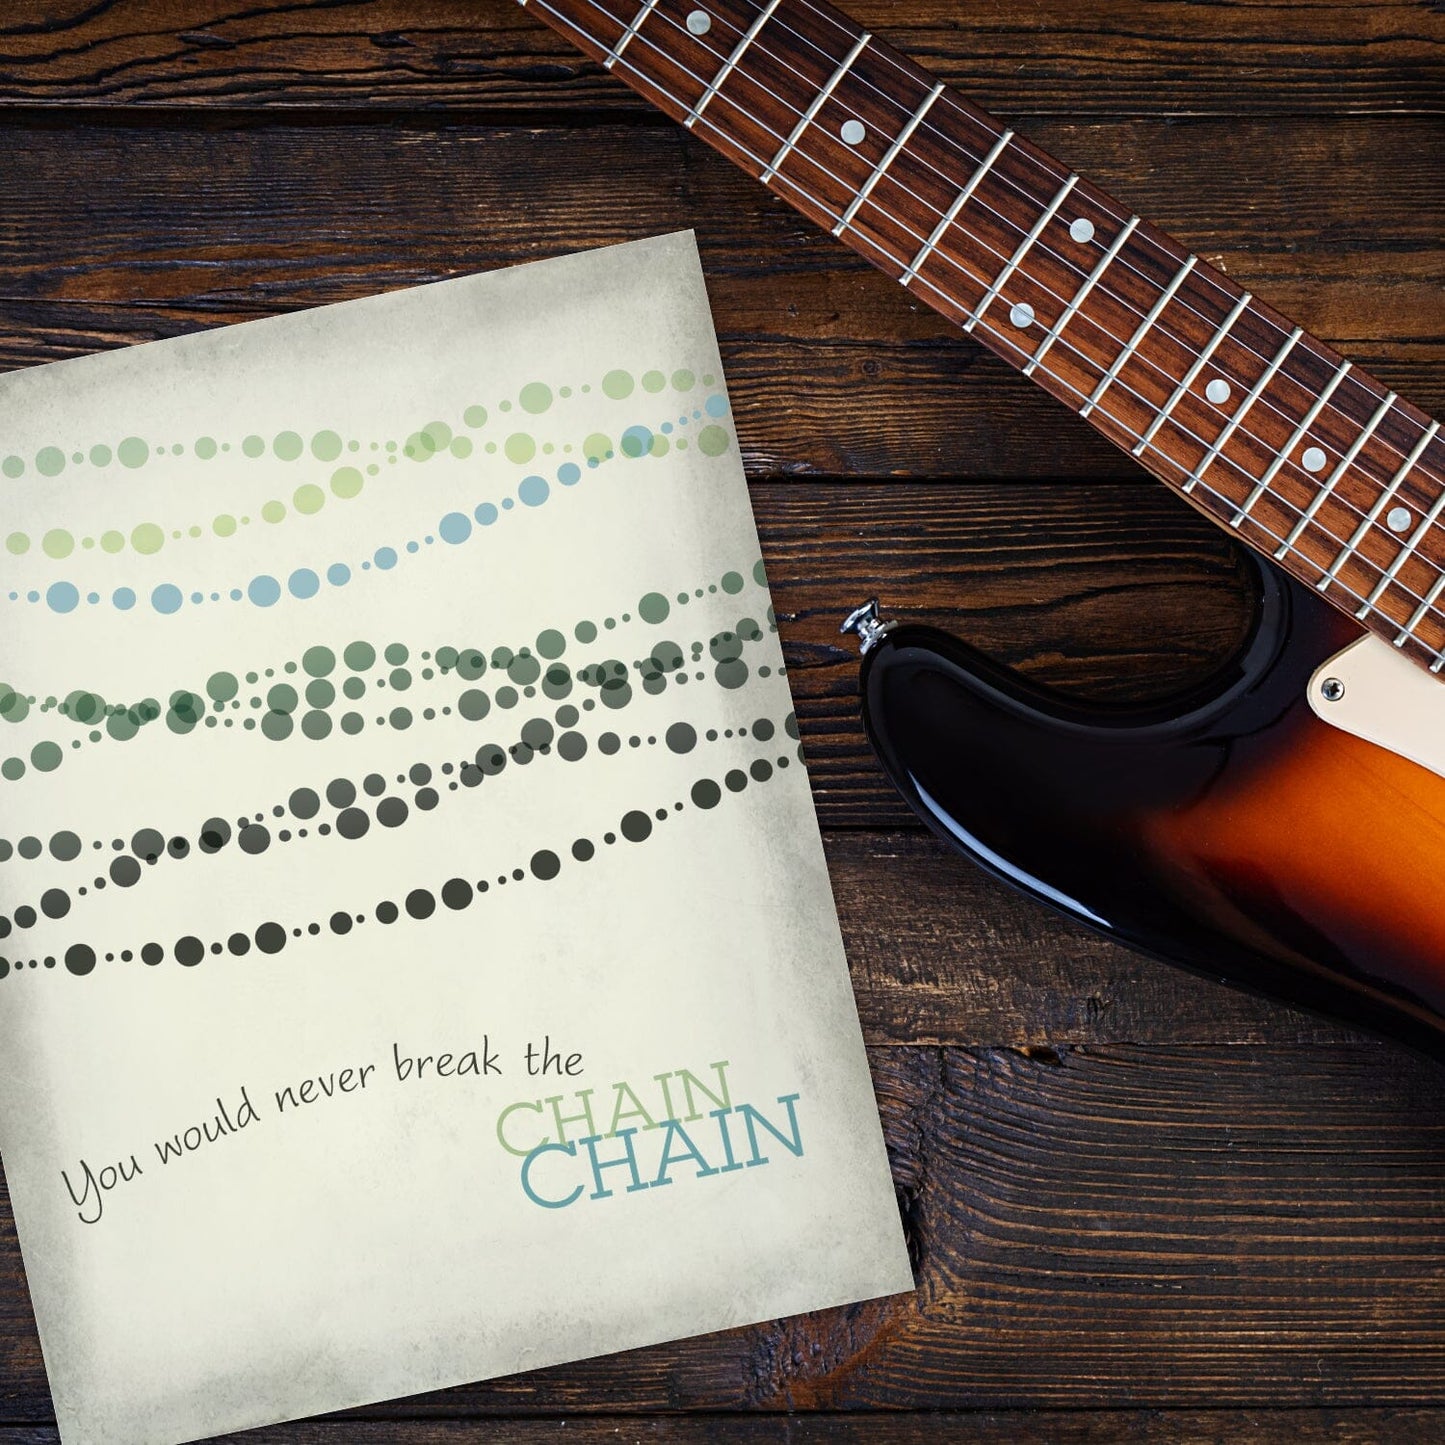 The Chain by Fleetwood Mac - Rock Music Song Lyric Print Song Lyrics Art Song Lyrics Art 8x10 Unframed Print 